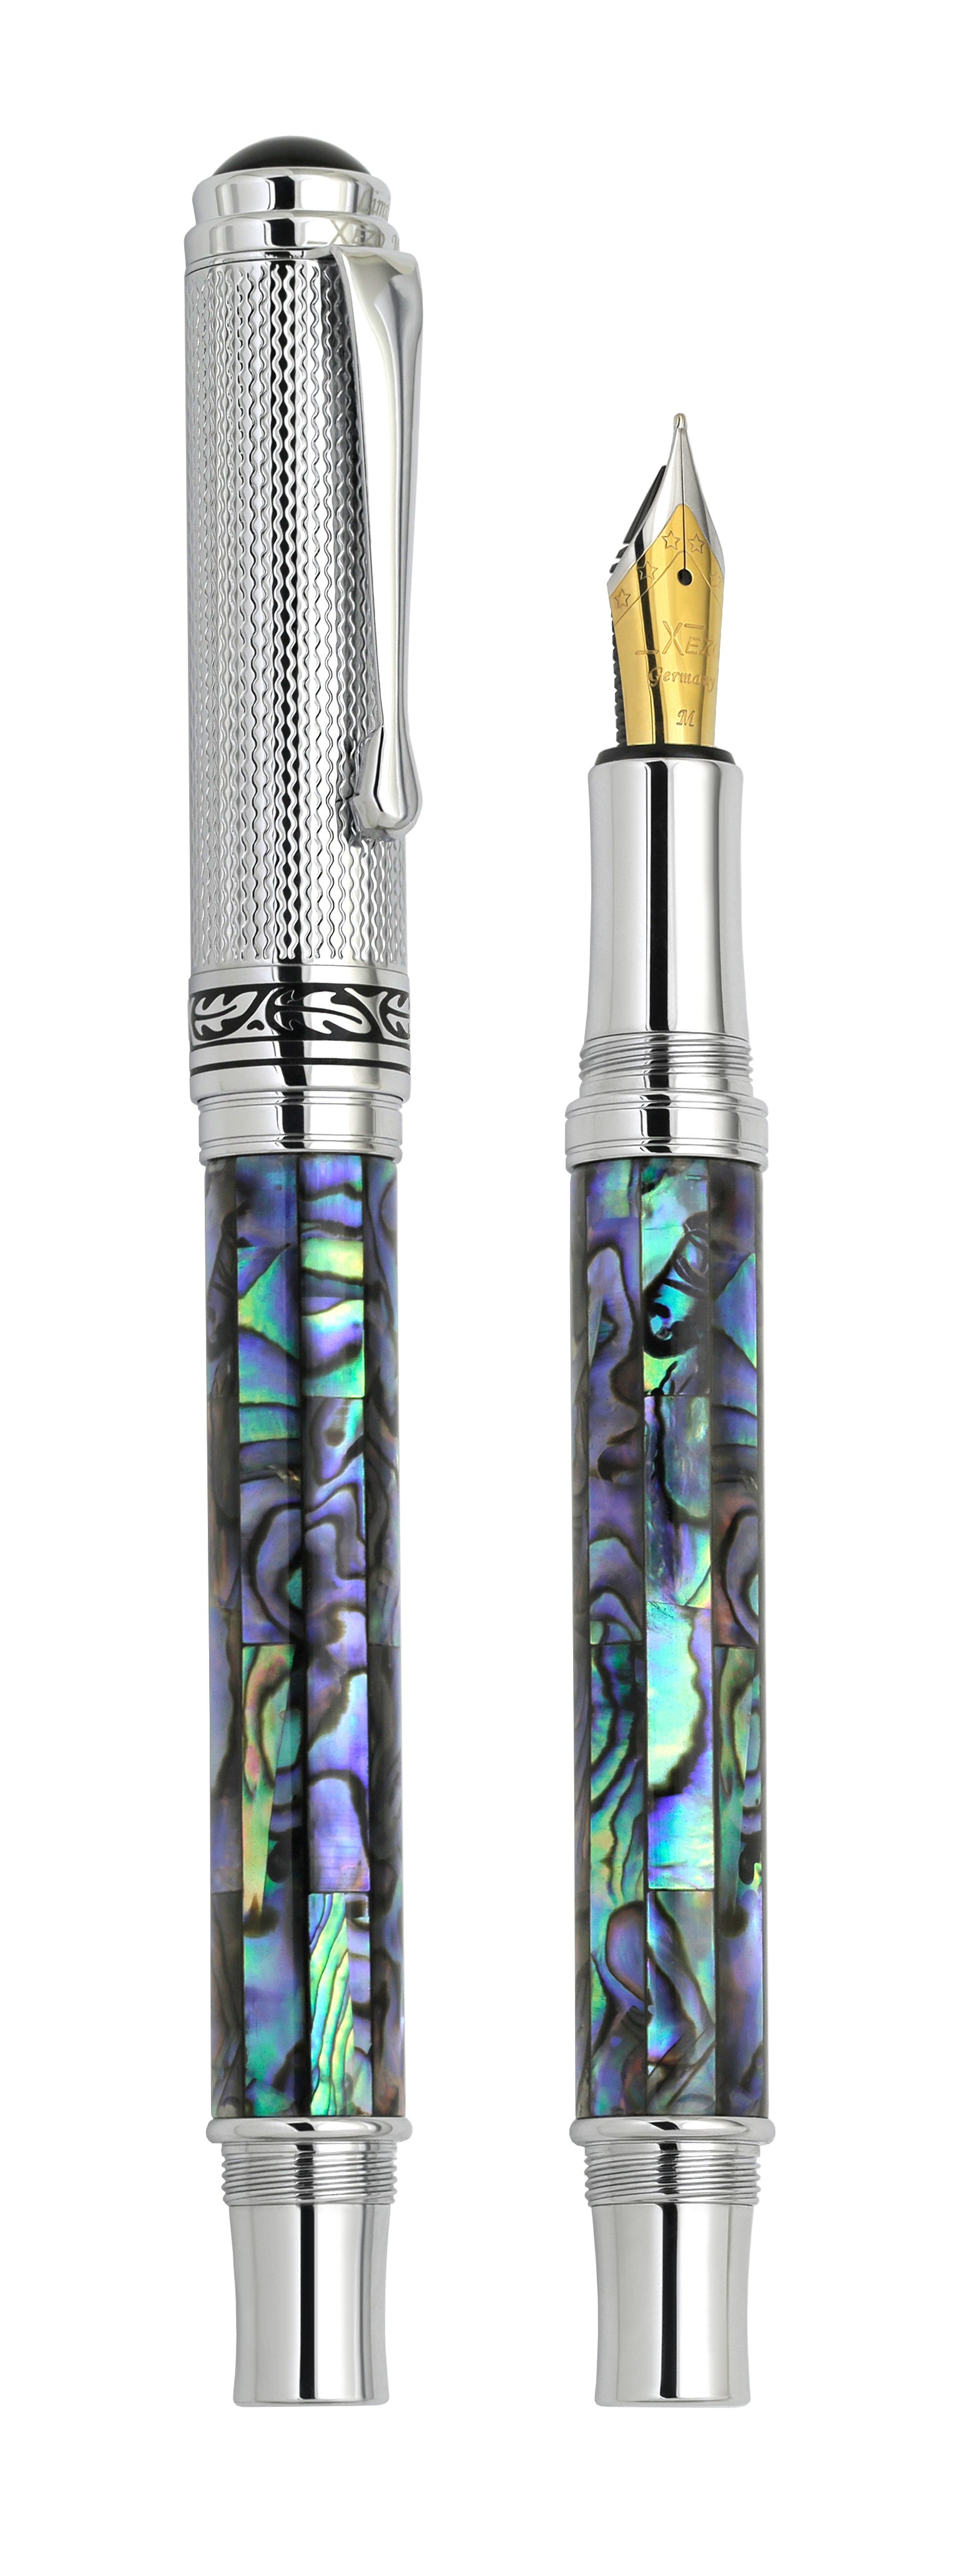 Xezo - Vertical view of two Maestro Paua Abalone Chrome FM fountain pens. The pen on the left is capped, and the pen on the right has no cap